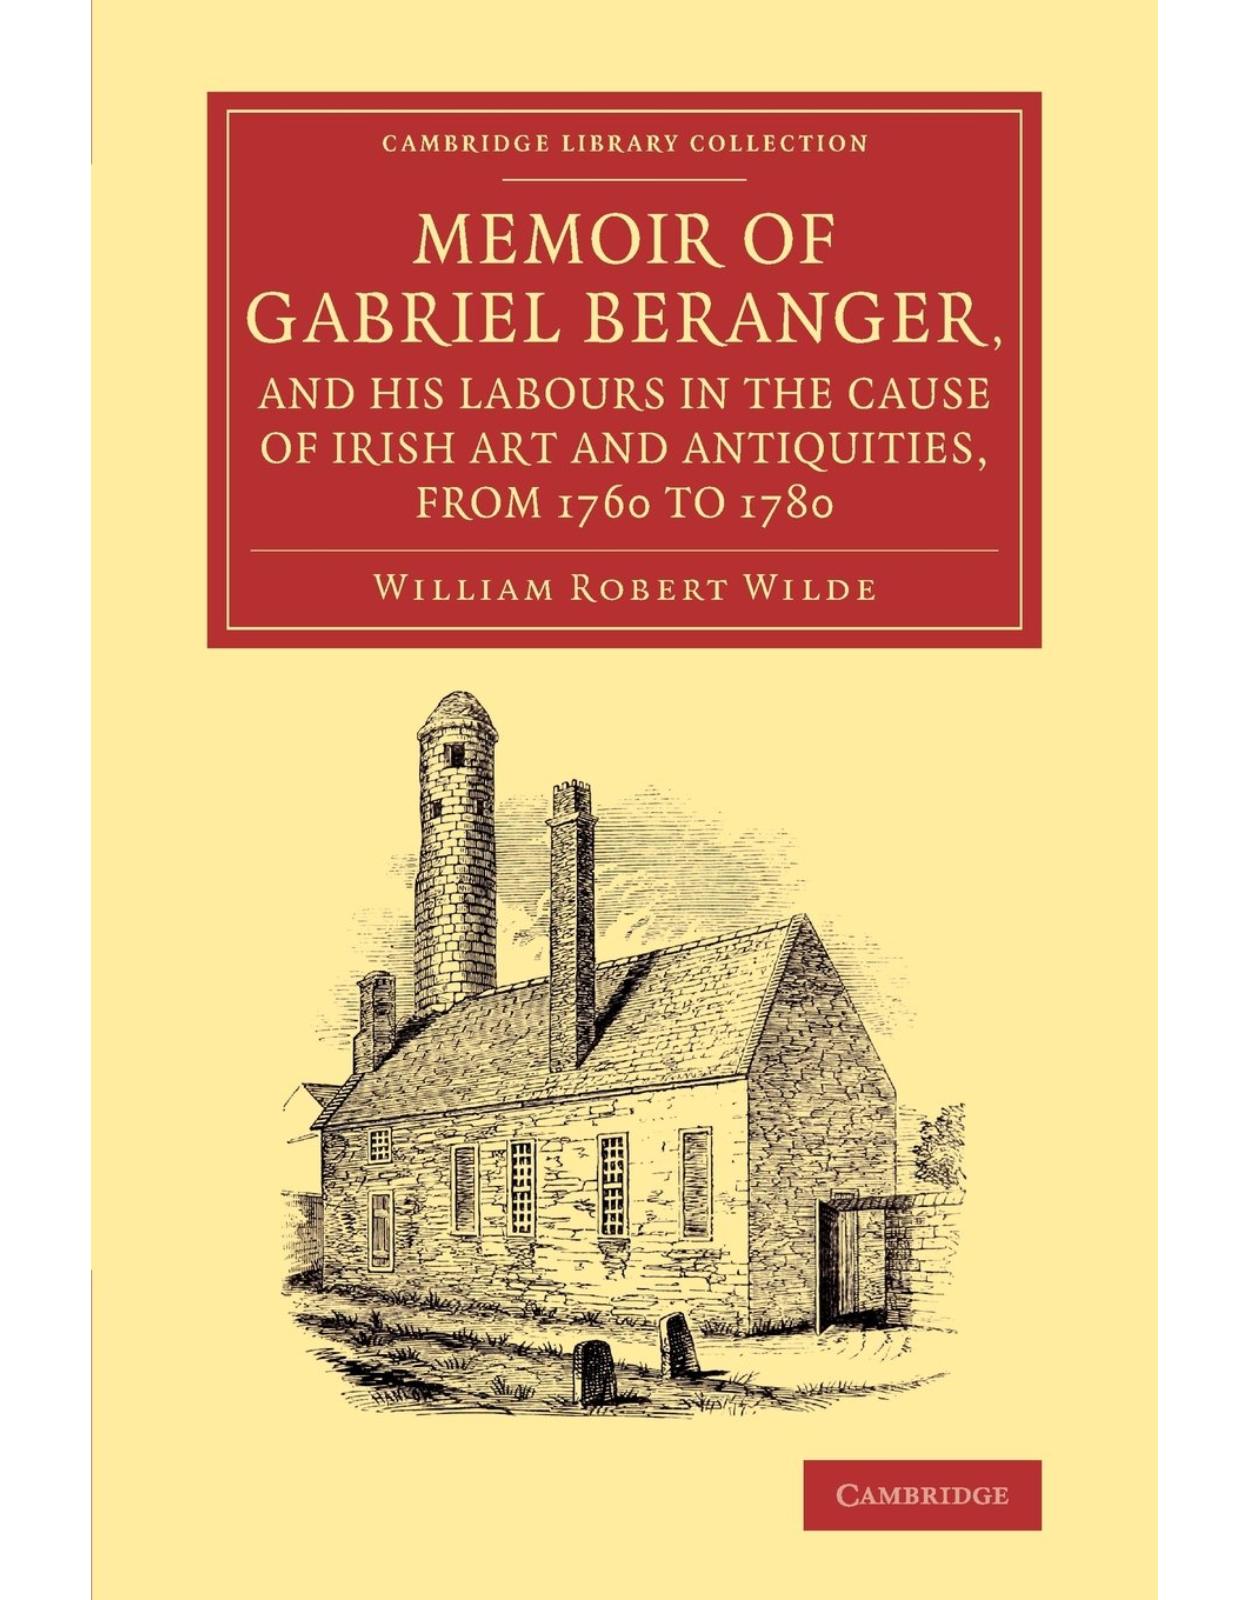 Memoir of Gabriel Beranger, and his Labours in the Cause of Irish Art and Antiquities, from 1760 to 1780 (Cambridge Library Collection - Art and Architecture)